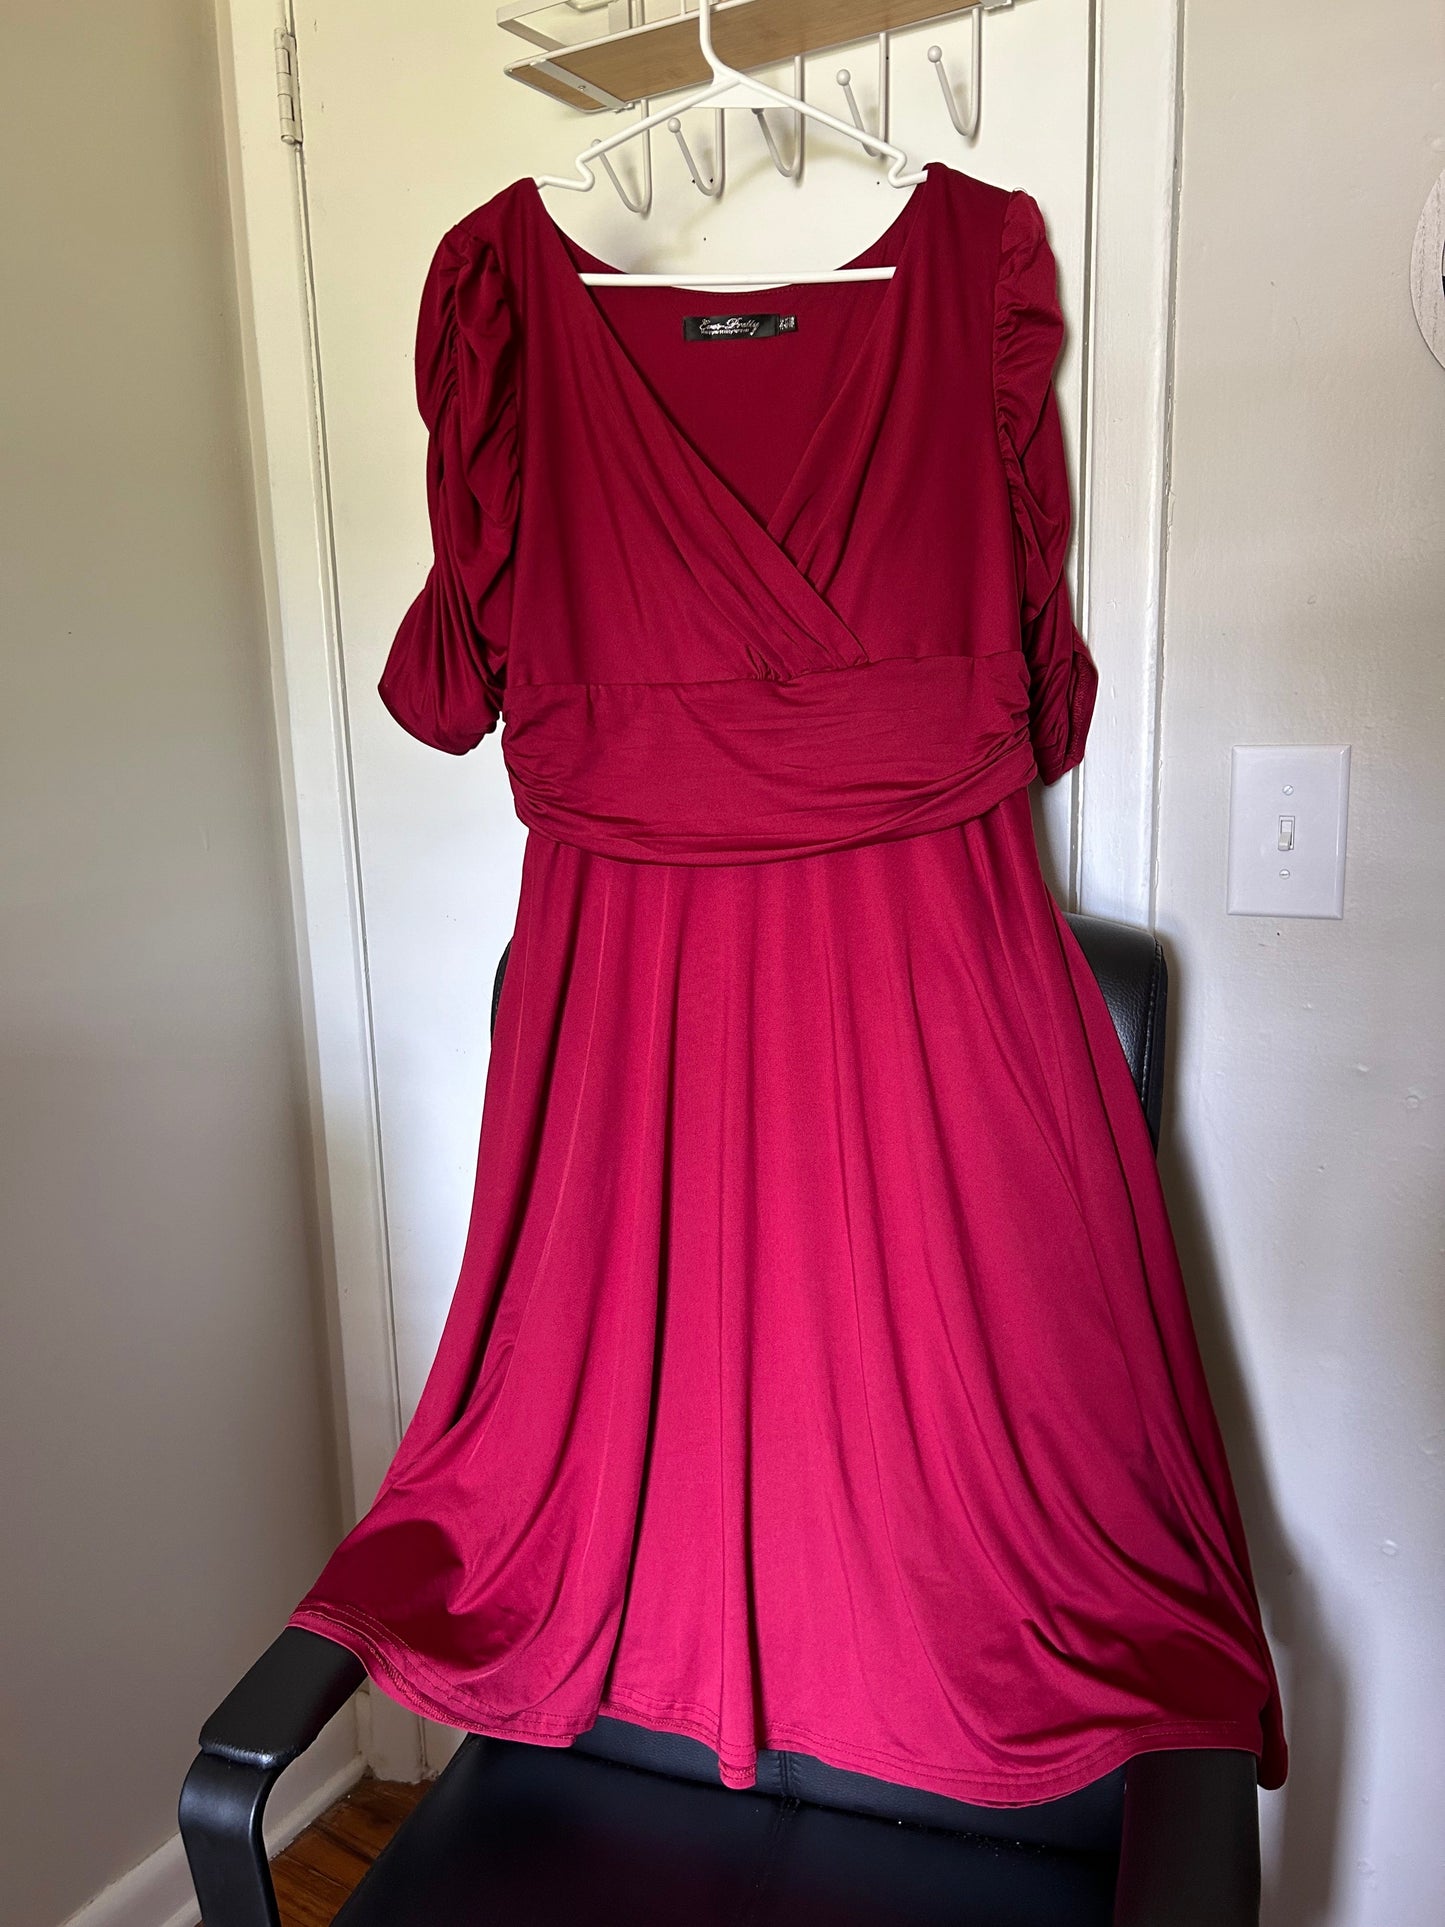 Wine red lace covering and size 14 dress.